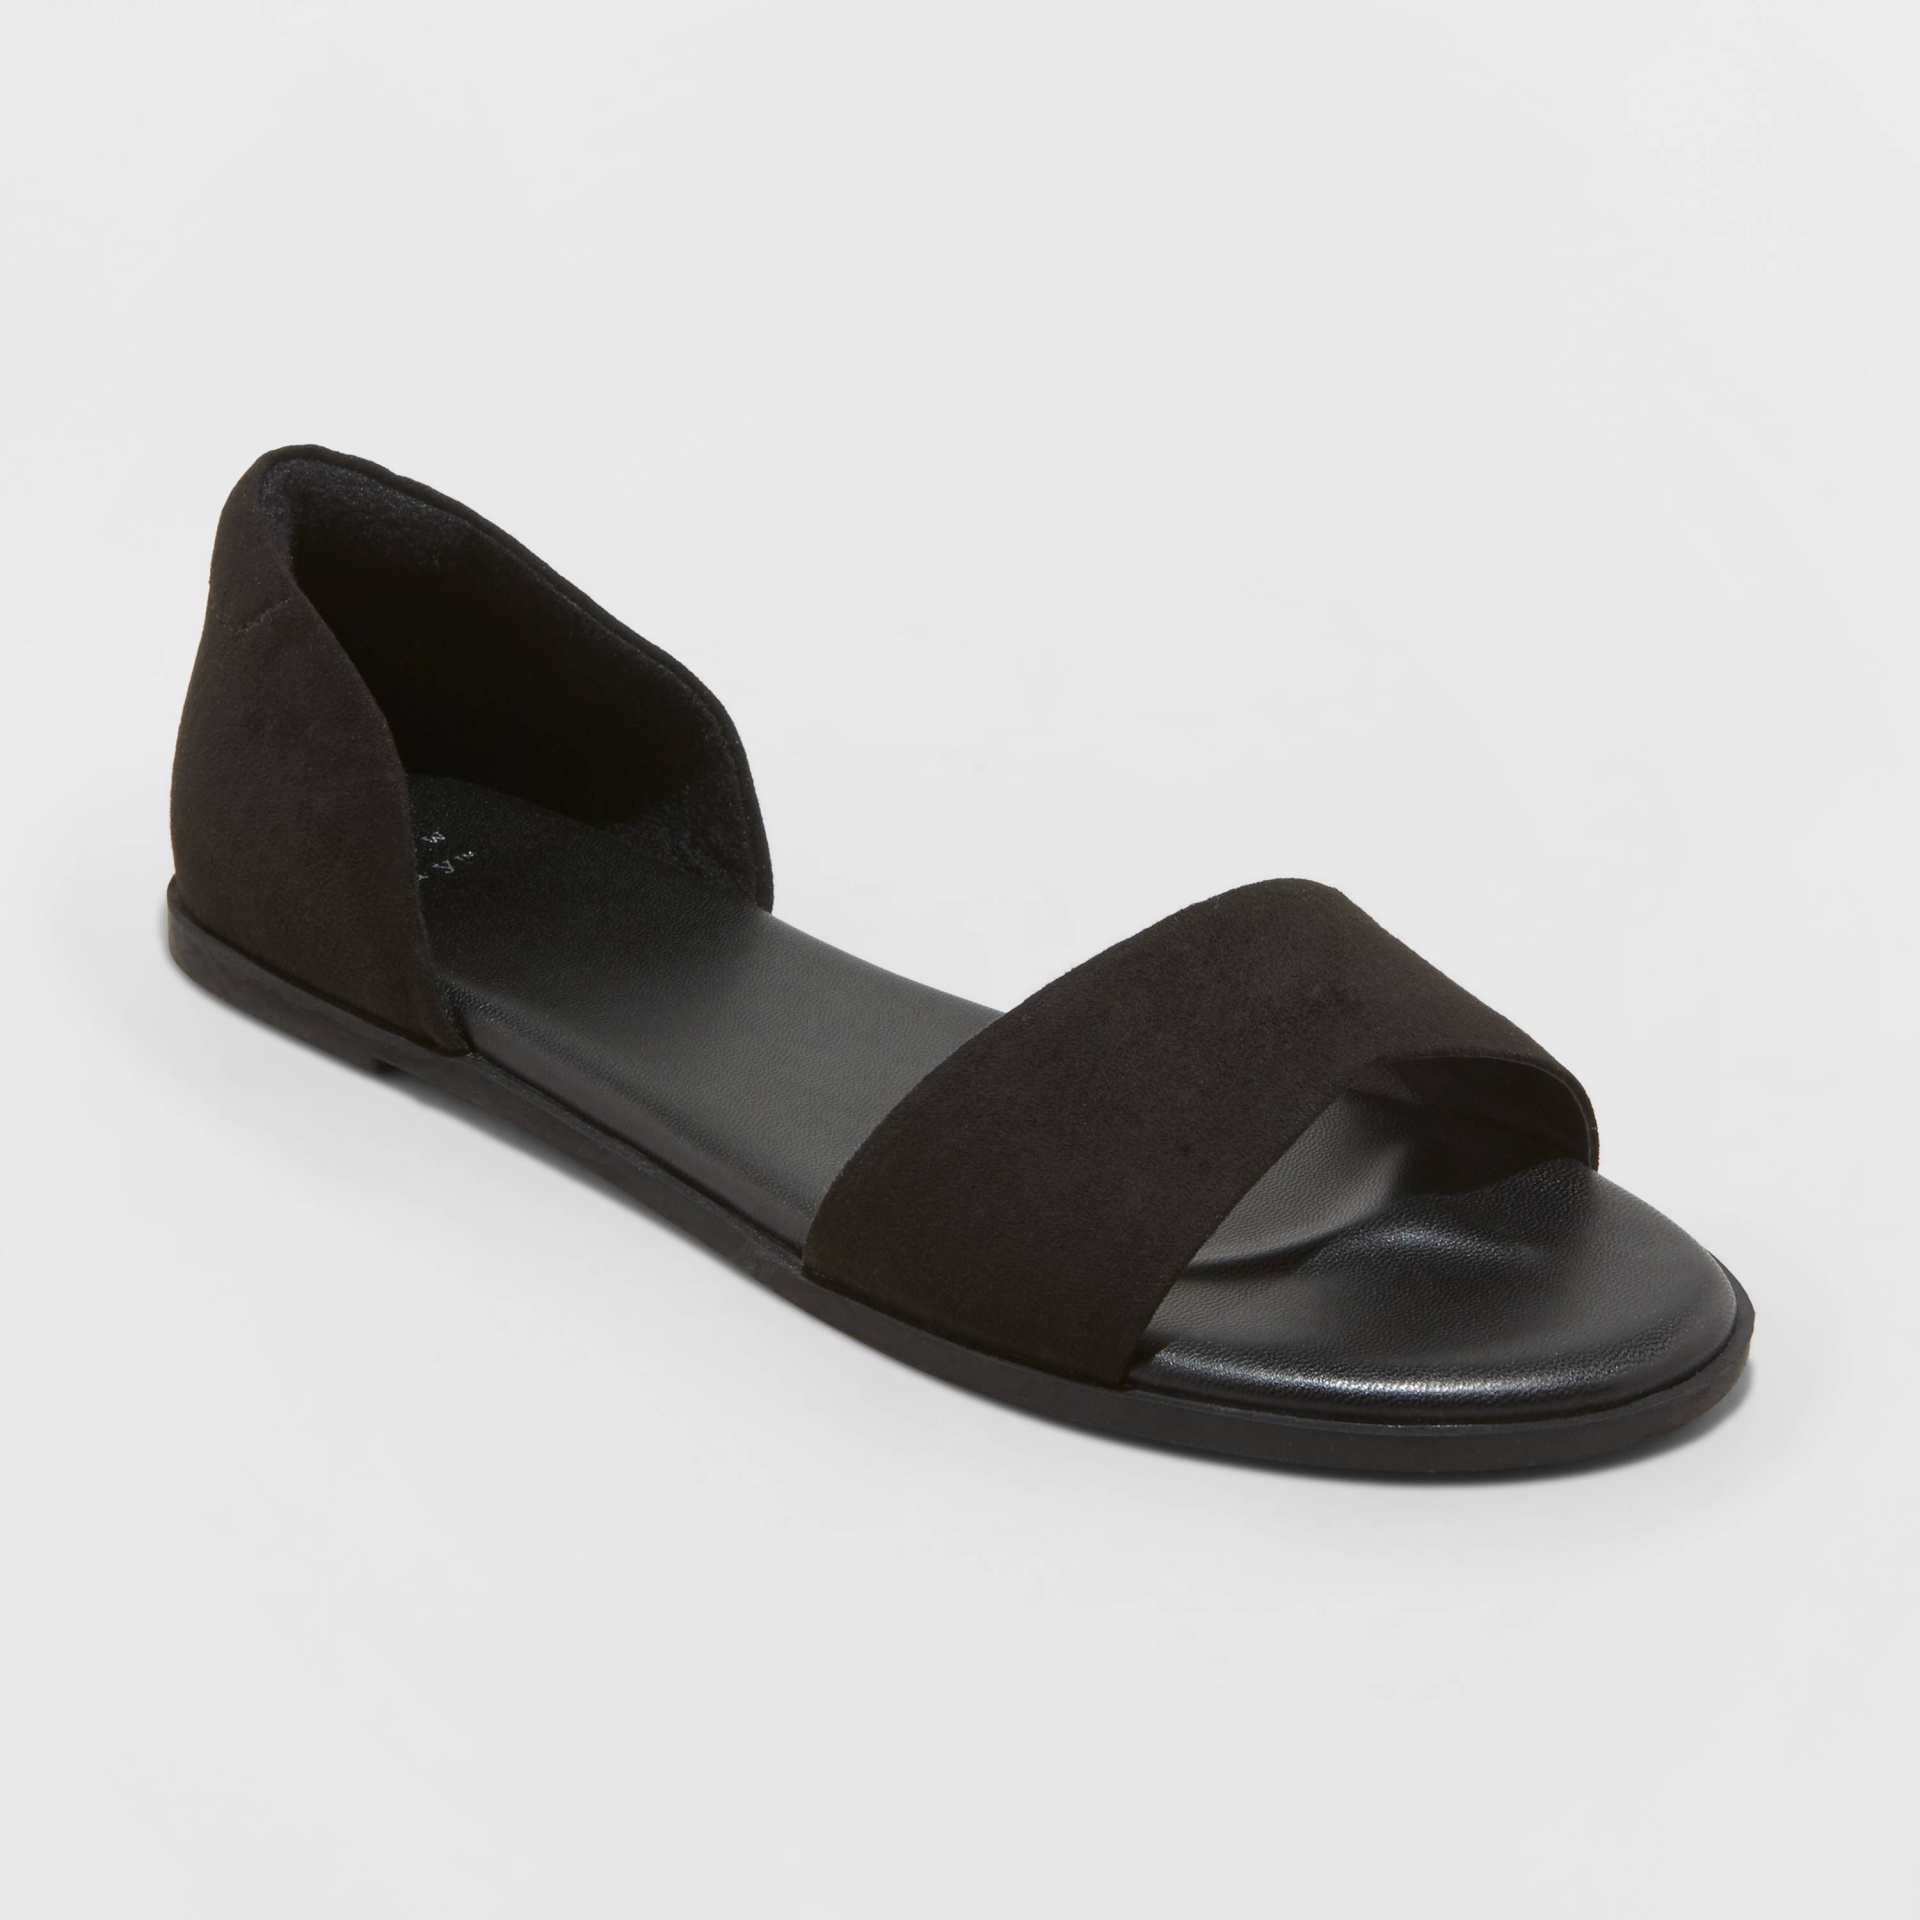 slide 1 of 4, Women's Ann Two Piece Slide Sandals - A New Day Black 6.5, 1 ct